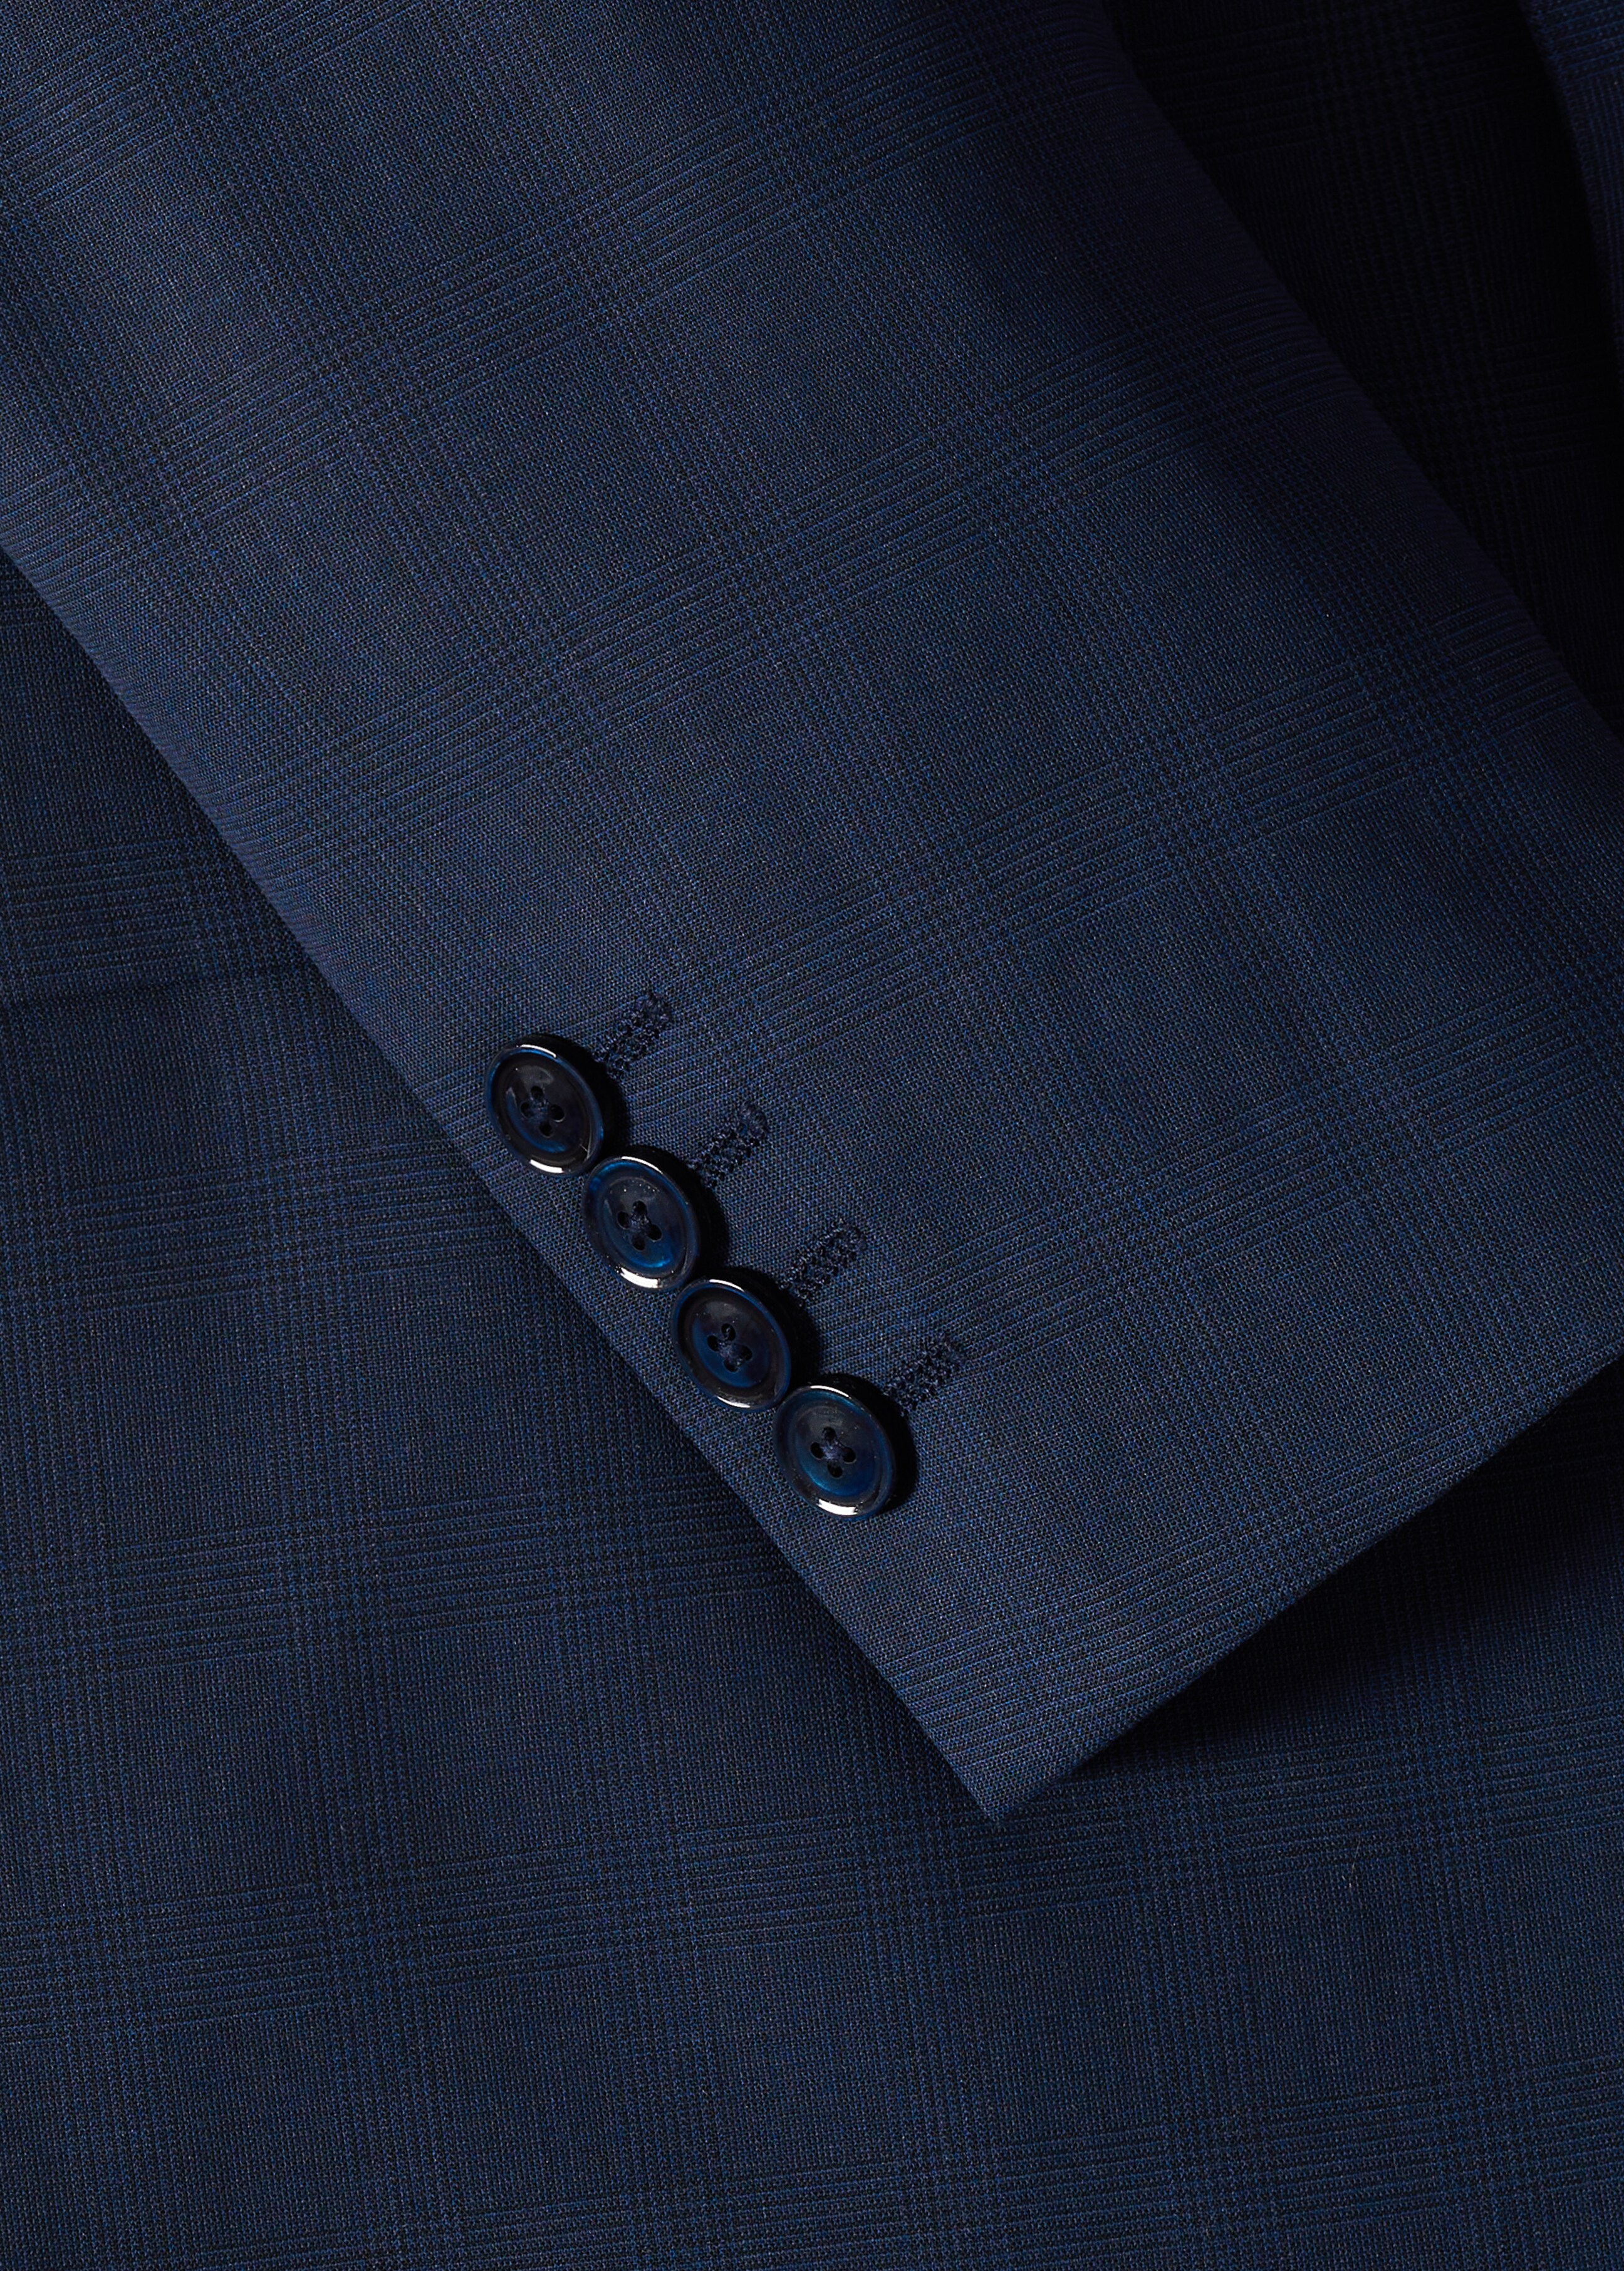 Wool suit jacket - Details of the article 7